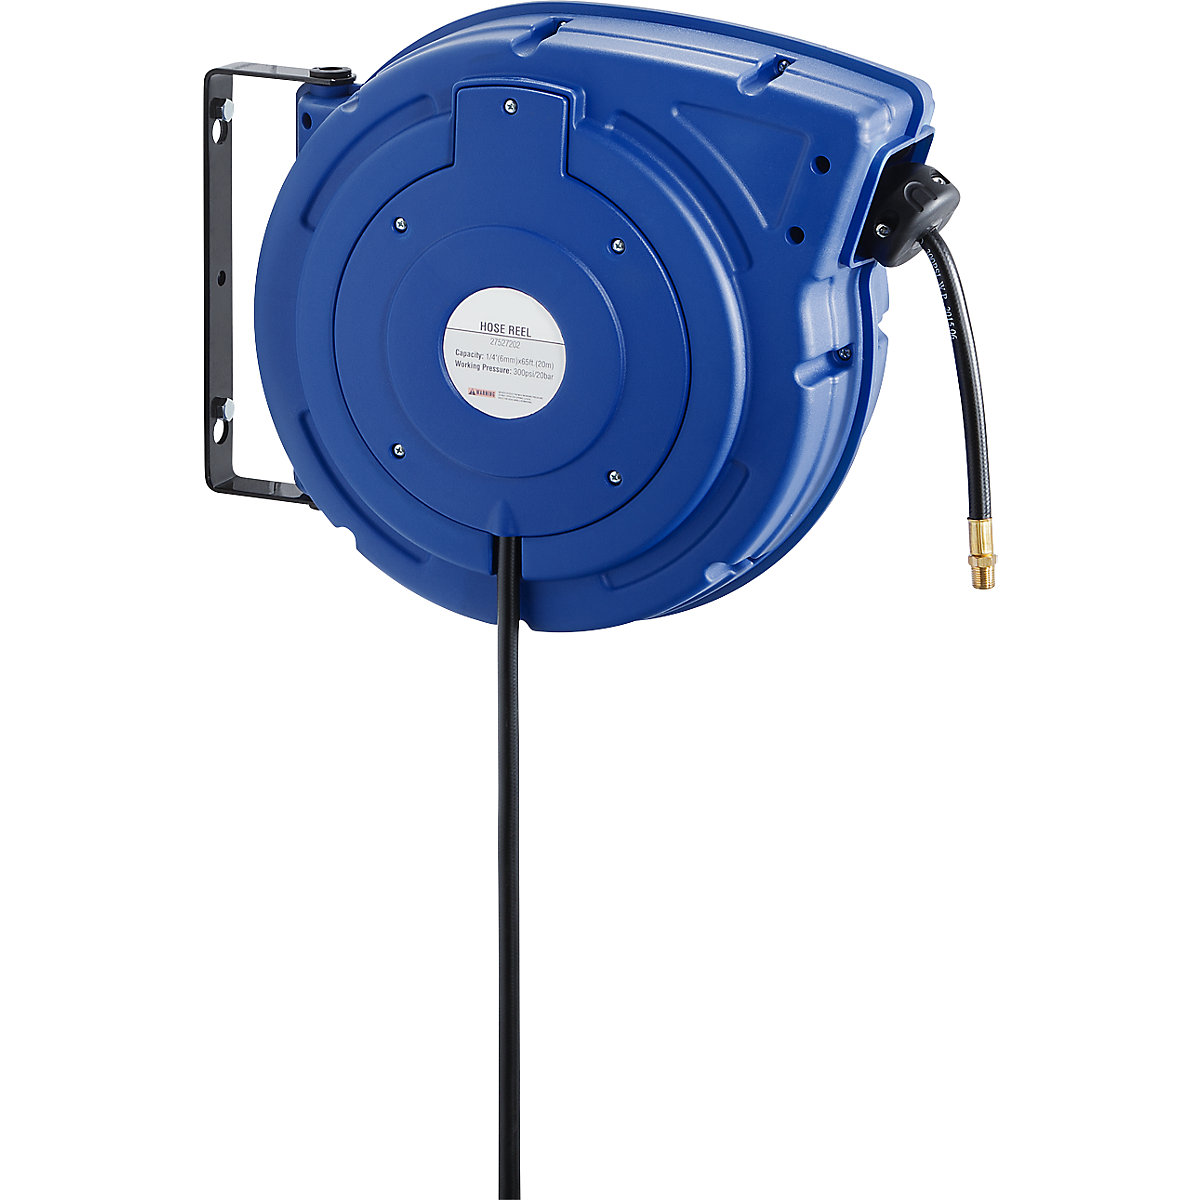 Hose reel – eurokraft basic: for indoor and outdoor use